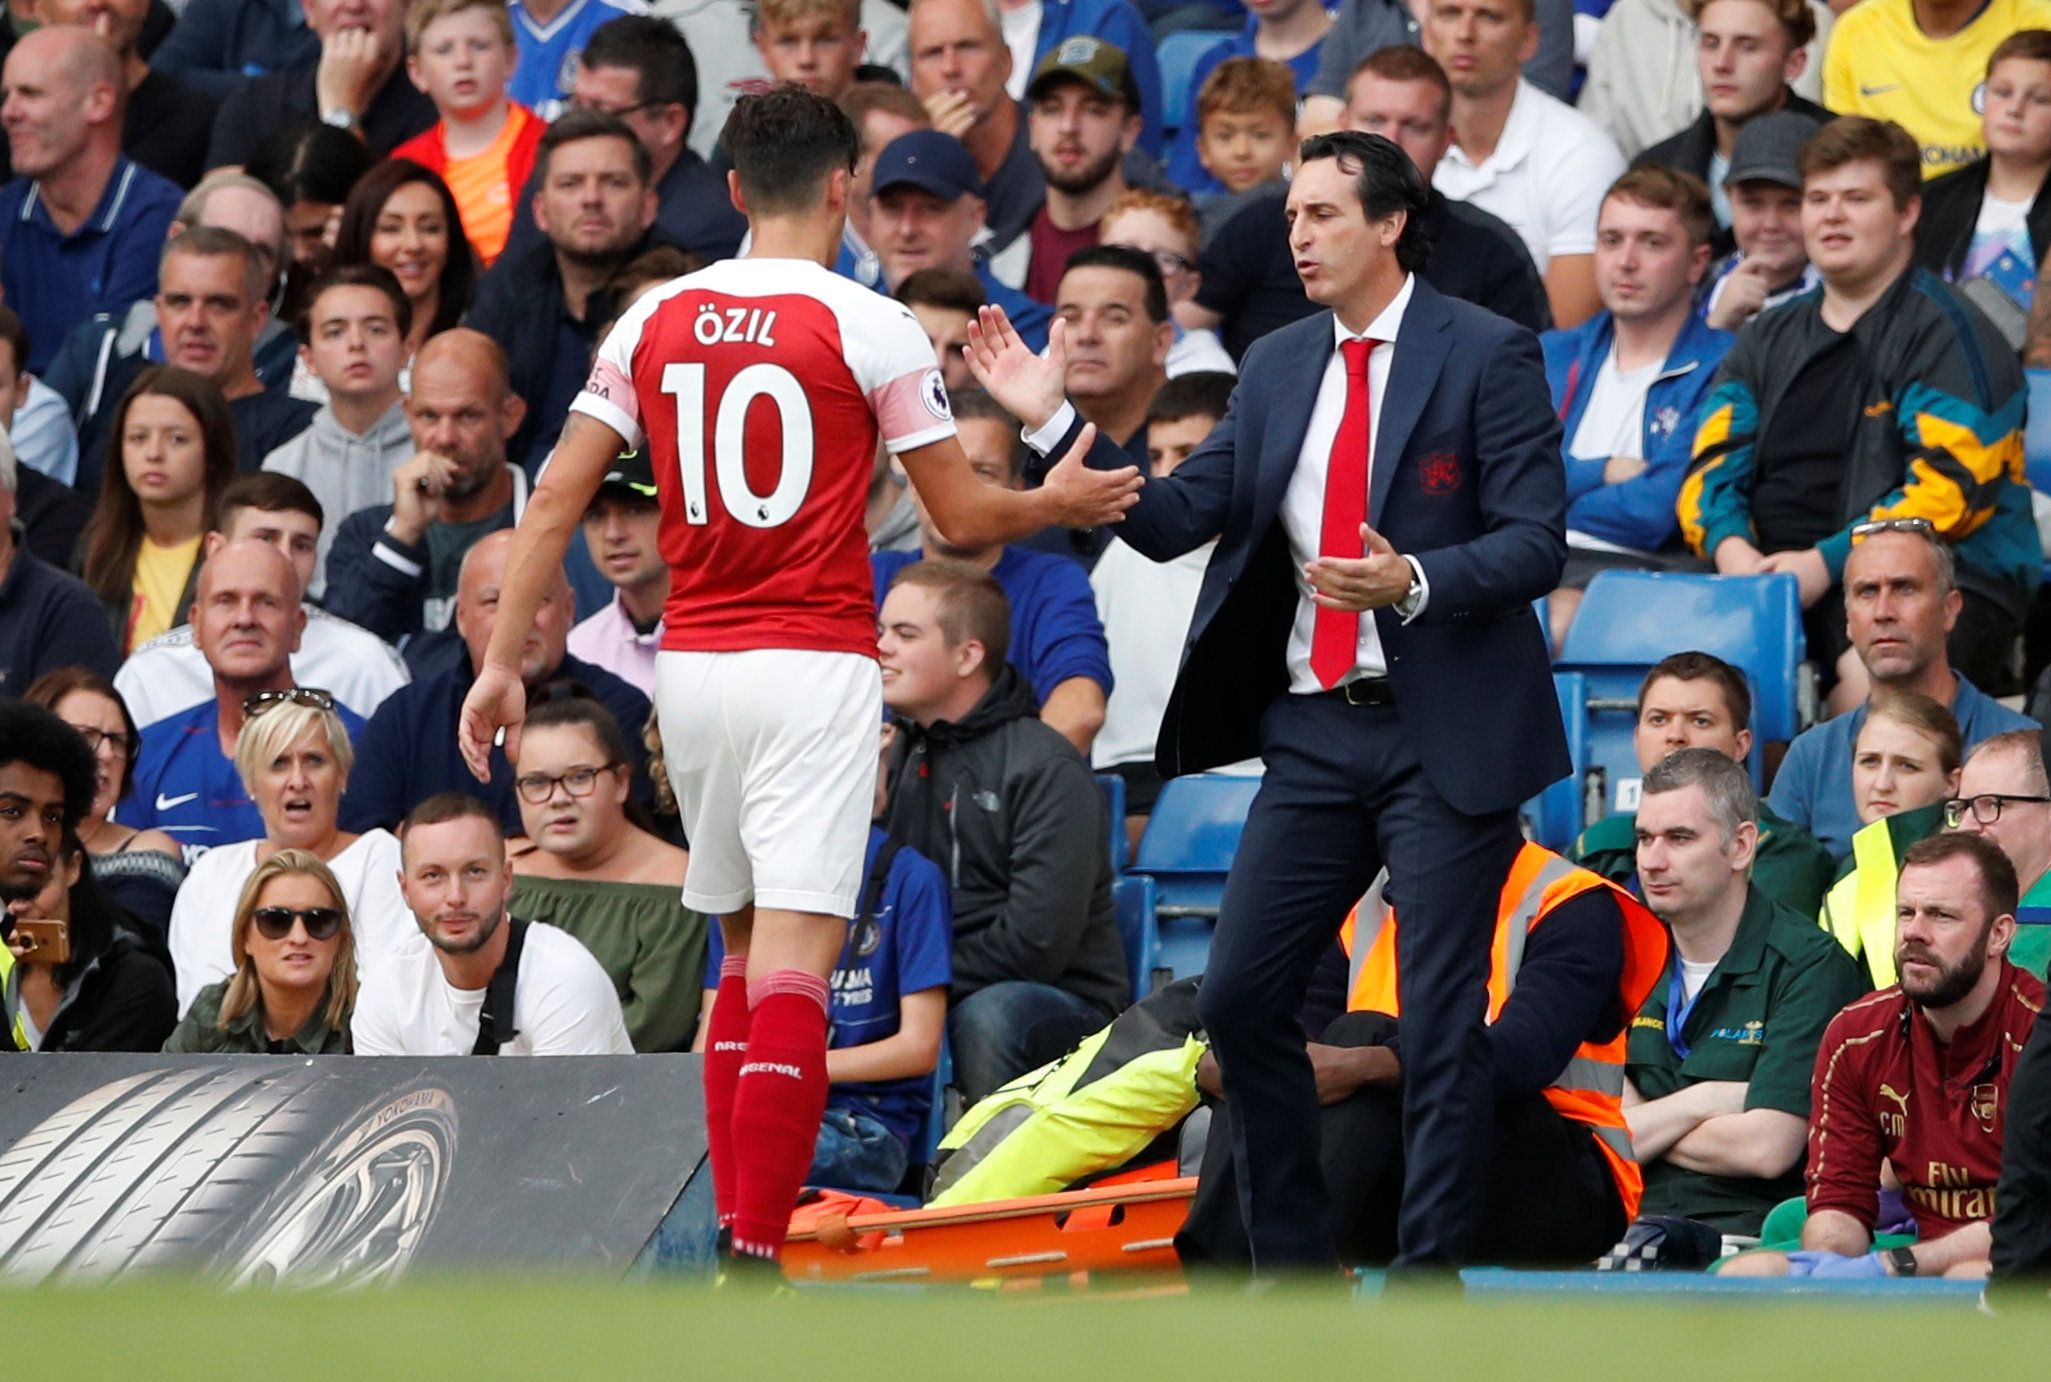 Soccer Football - Premier League - Chelsea v Arsenal - Stamford Bridge, London, Britain - August 18, 2018  Arsenal's Mesut Ozil with manager Unai Emery after being substituted off  Action Images via Reuters/John Sibley  EDITORIAL USE ONLY. No use with unauthorized audio, video, data, fixture lists, club/league logos or "live" services. Online in-match use limited to 75 images, no video emulation. No use in betting, games or single club/league/player publications.  Please contact your account rep